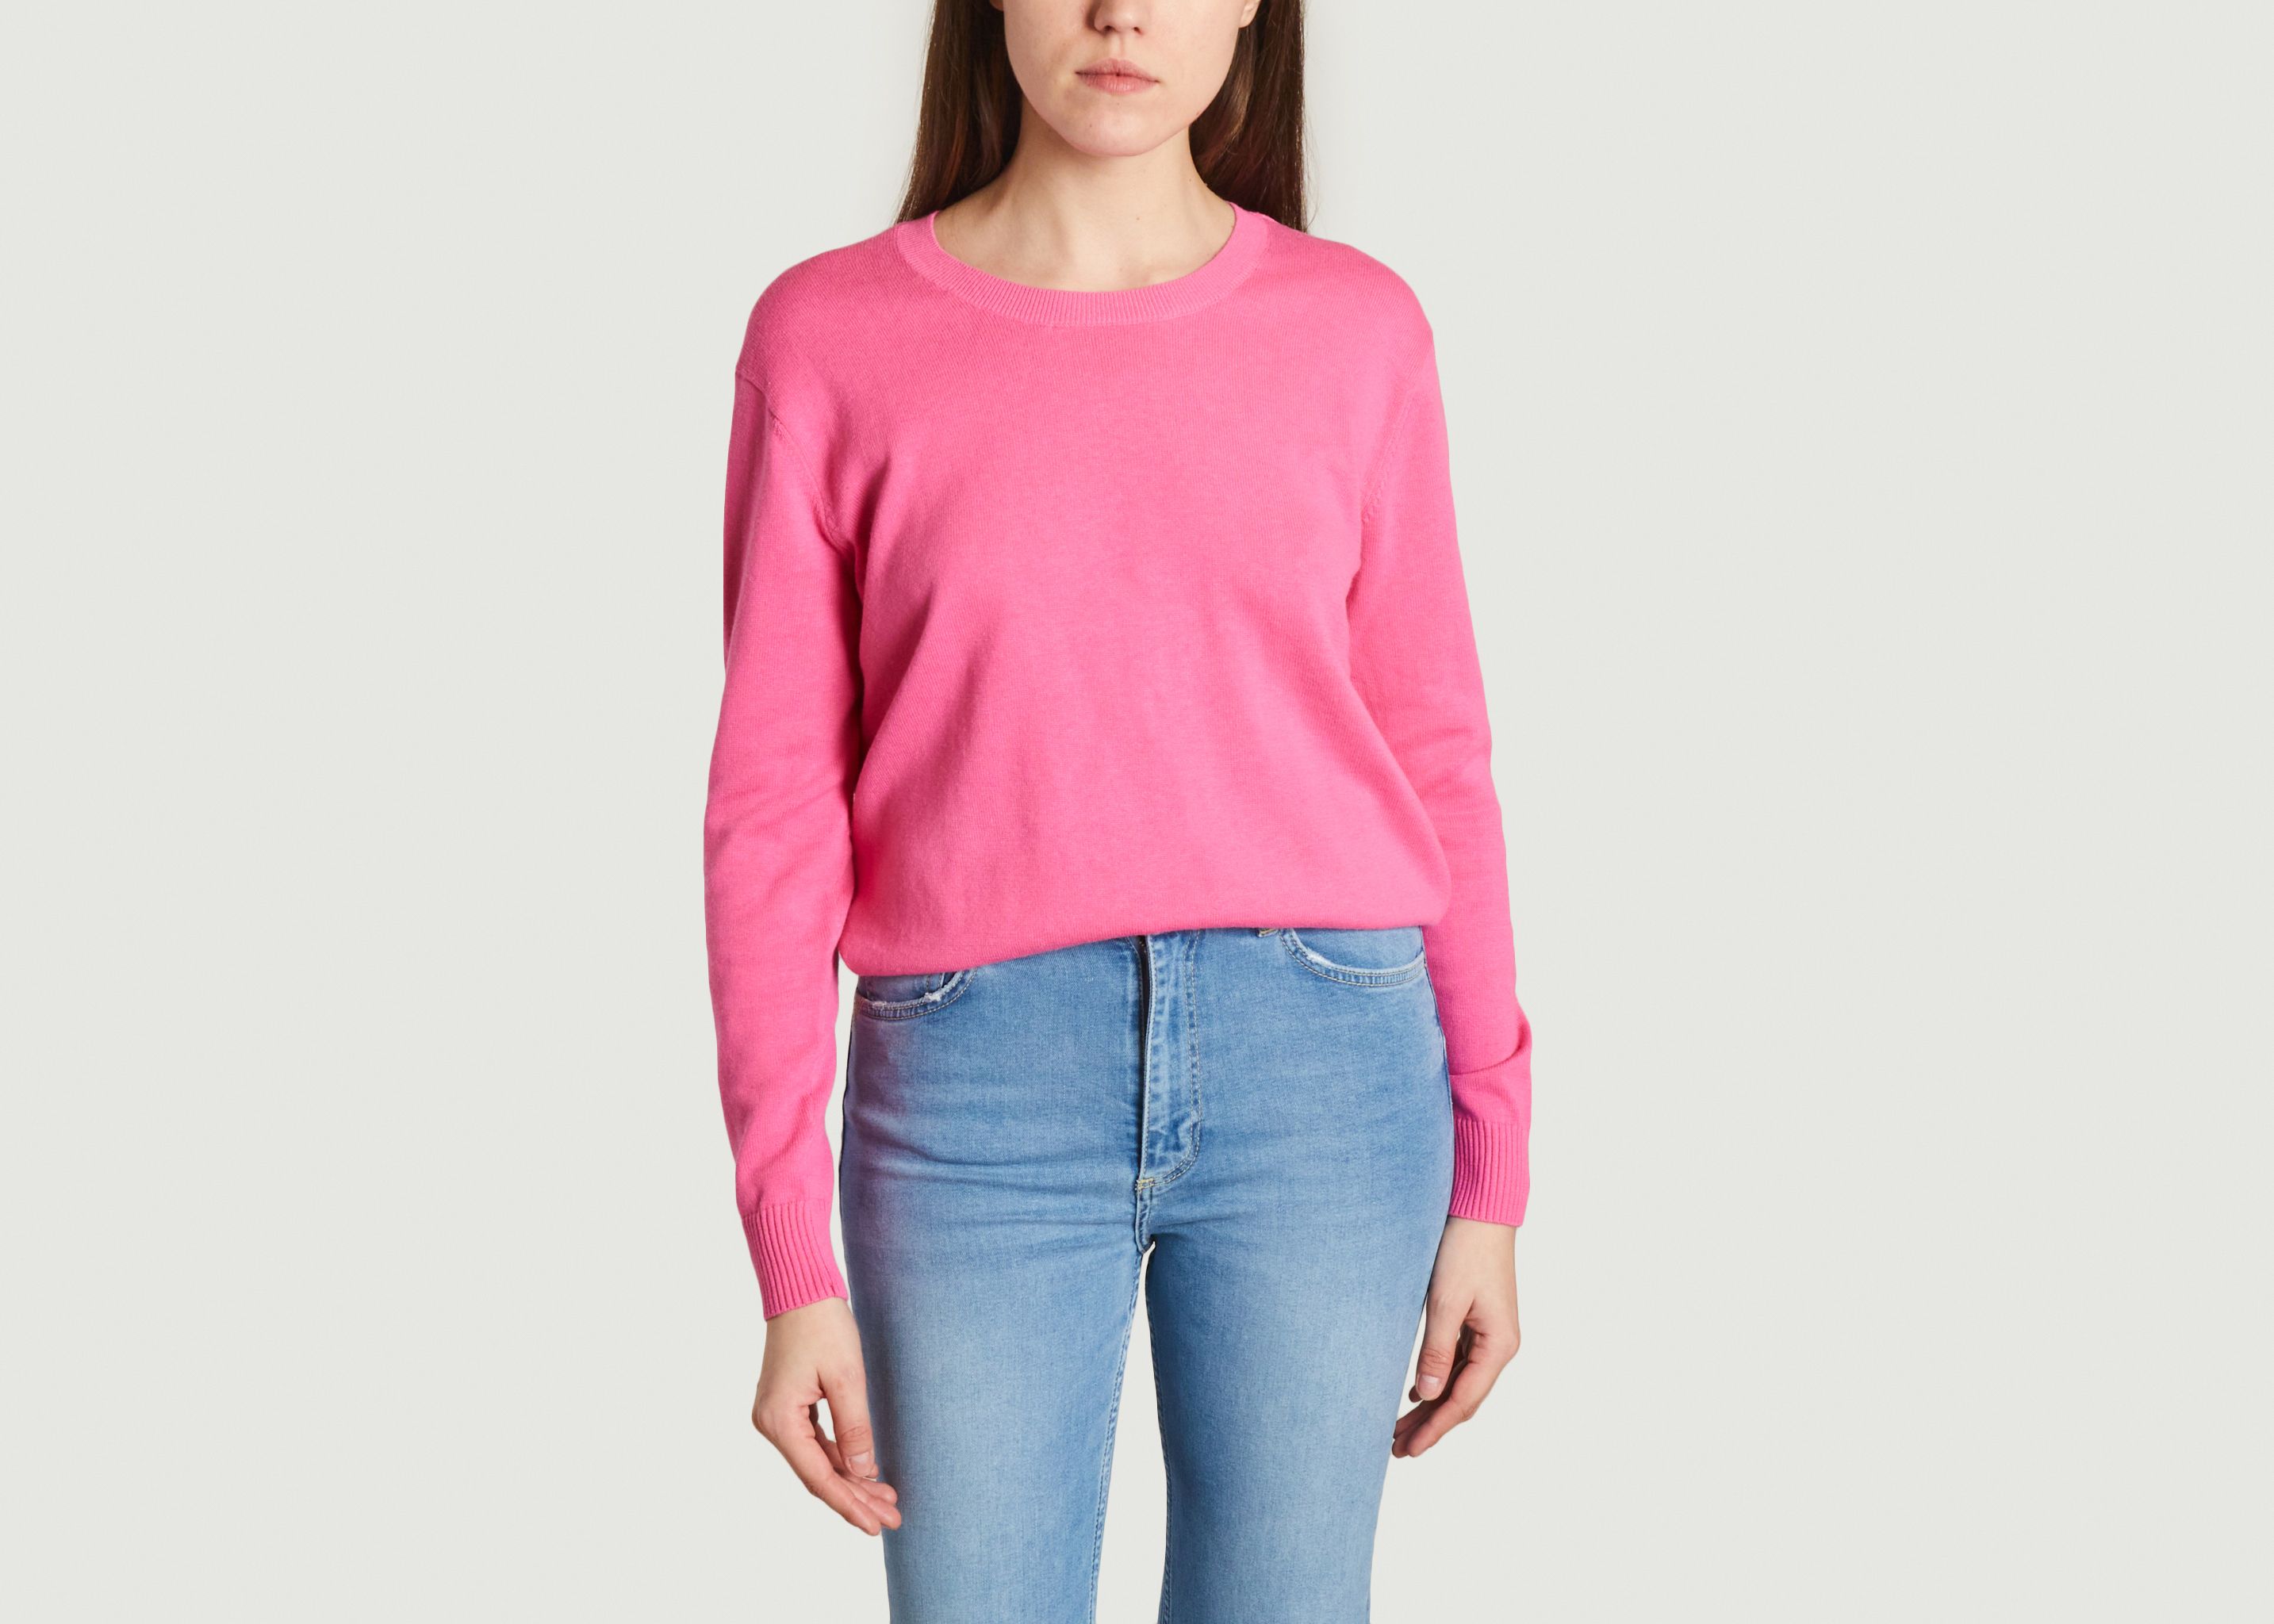 Yvette sweater - Absolut cashmere